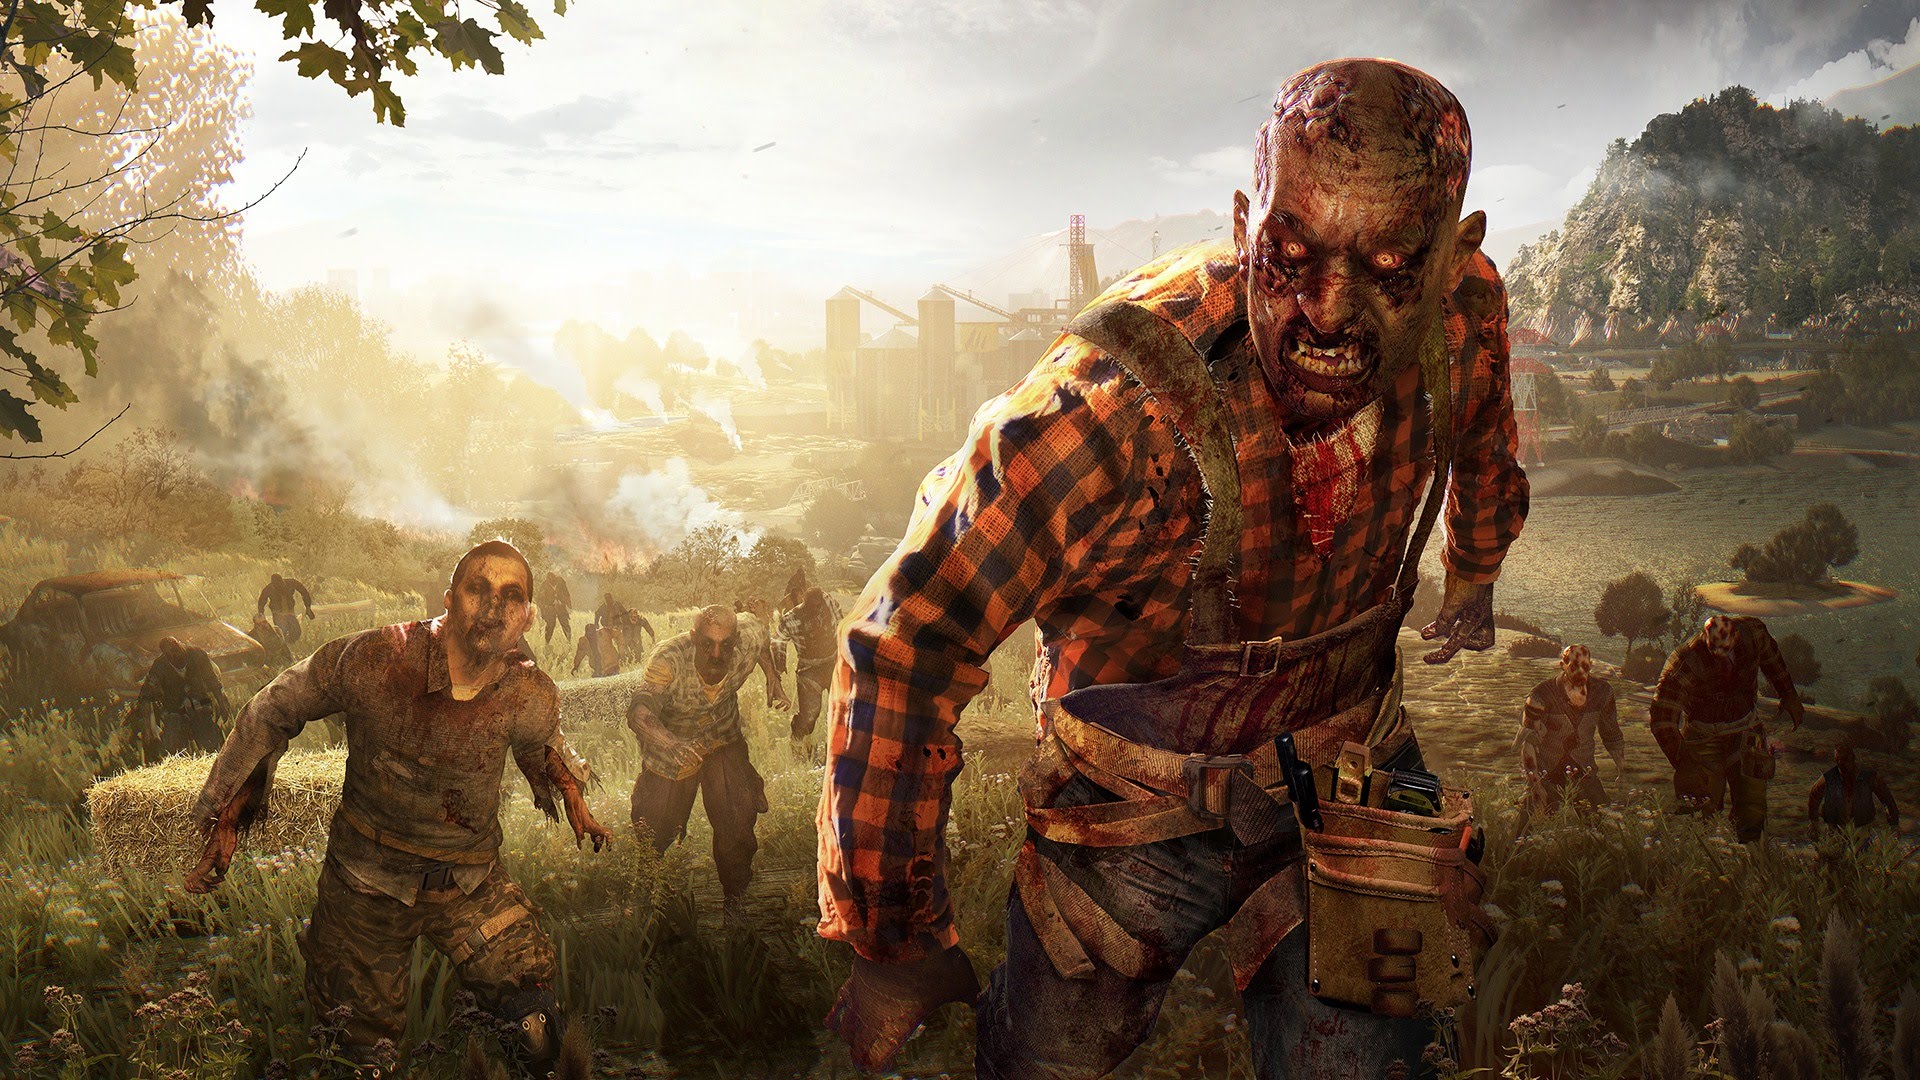 Video Game Dying Light: The Following HD Wallpaper | Background Image